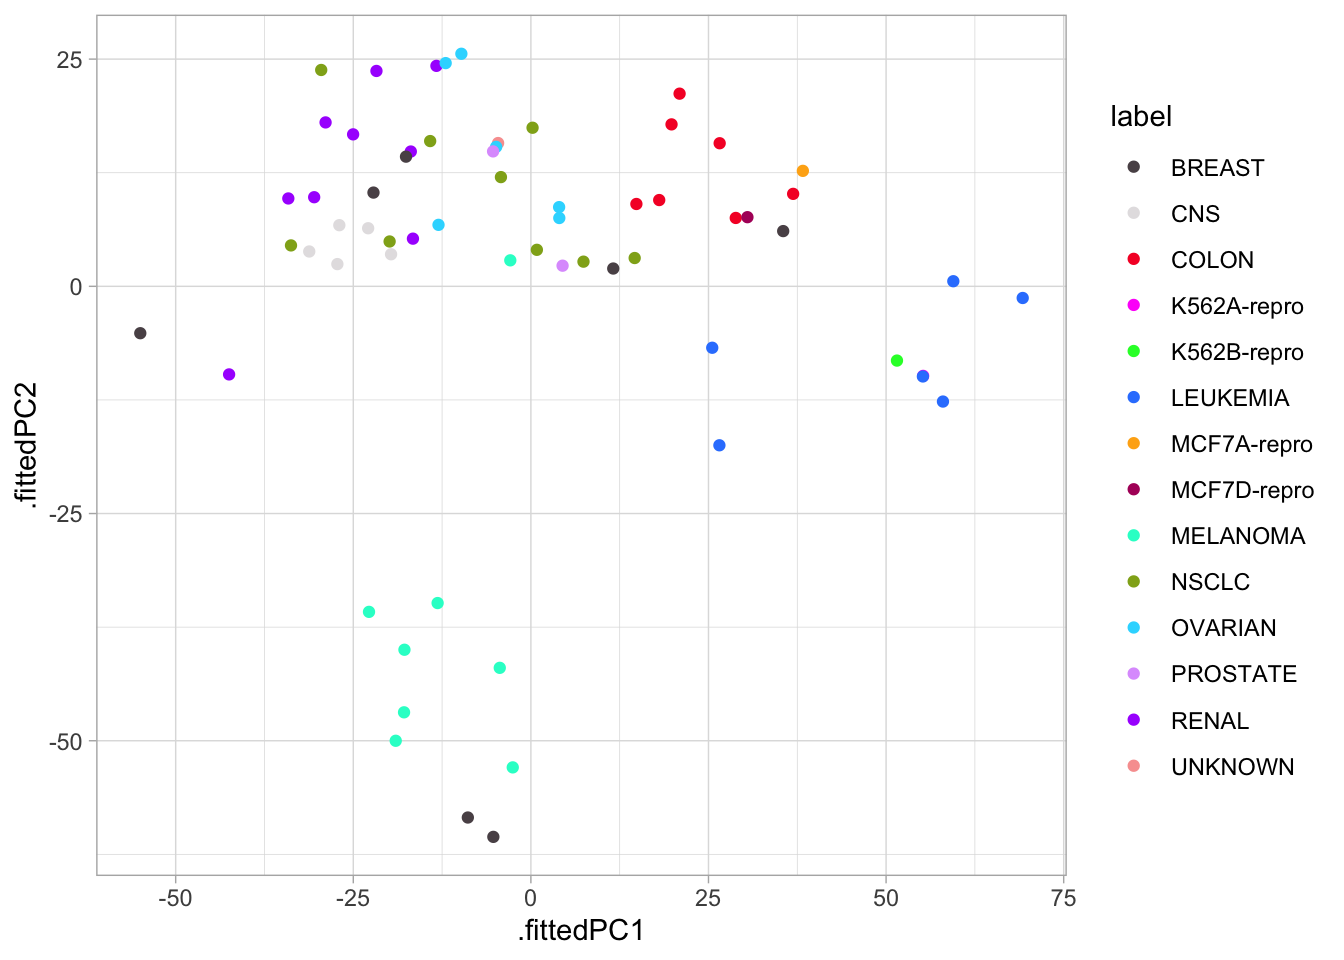 Scatter plot of nci60_pcs across the first 2 principal components. Colors by label which has 14 unique values. Observations with same label appears fairly close together for most labels.